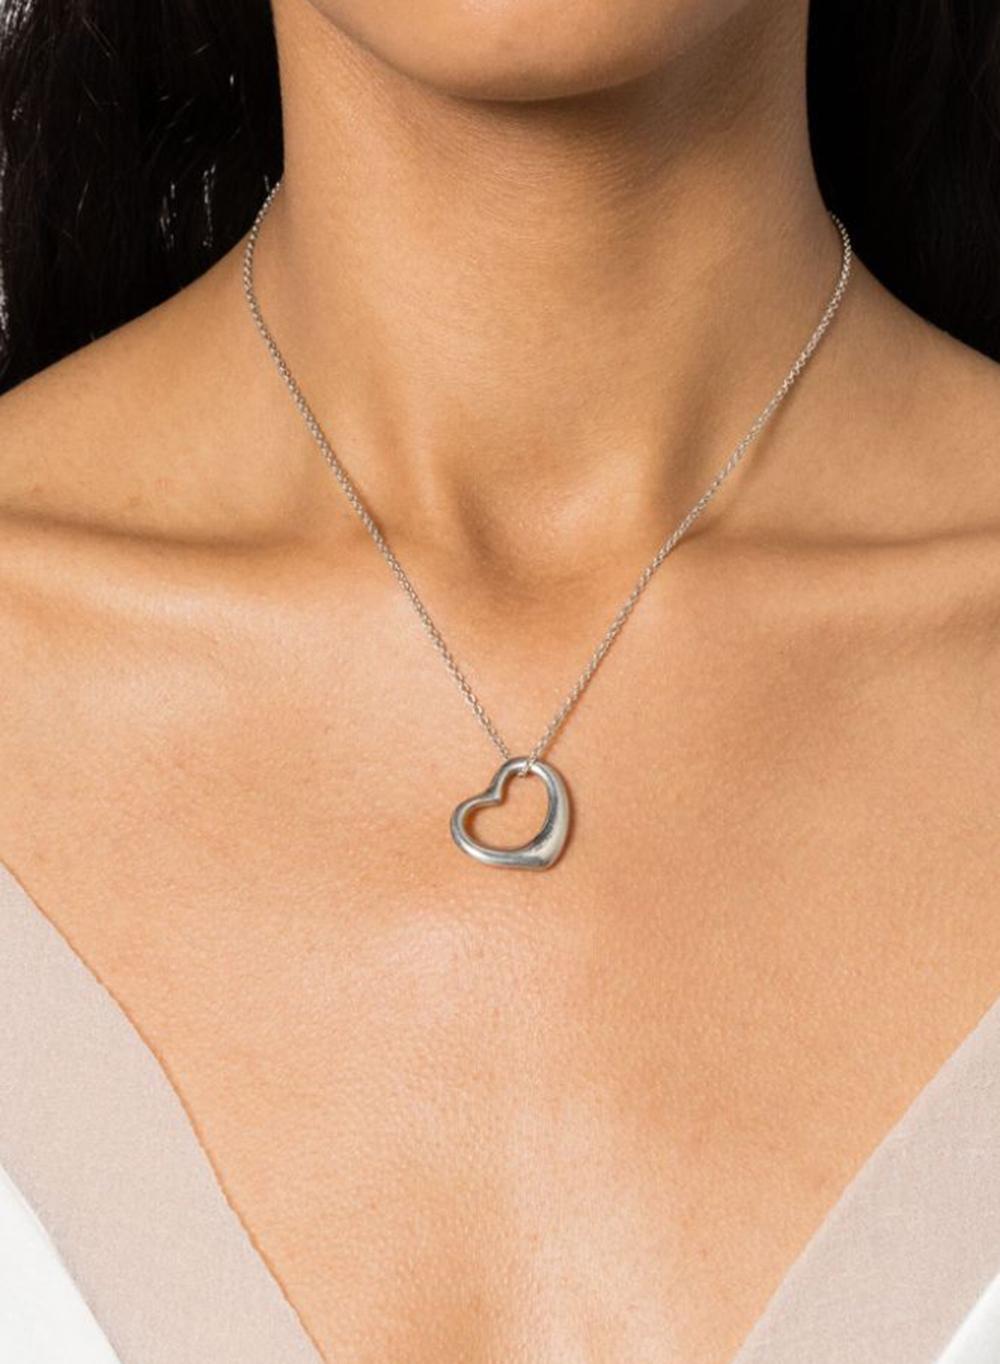 Tiffany & co by Elsa Perreti Open Heart Silver Sterling Necklace In Good Condition For Sale In Paris, FR